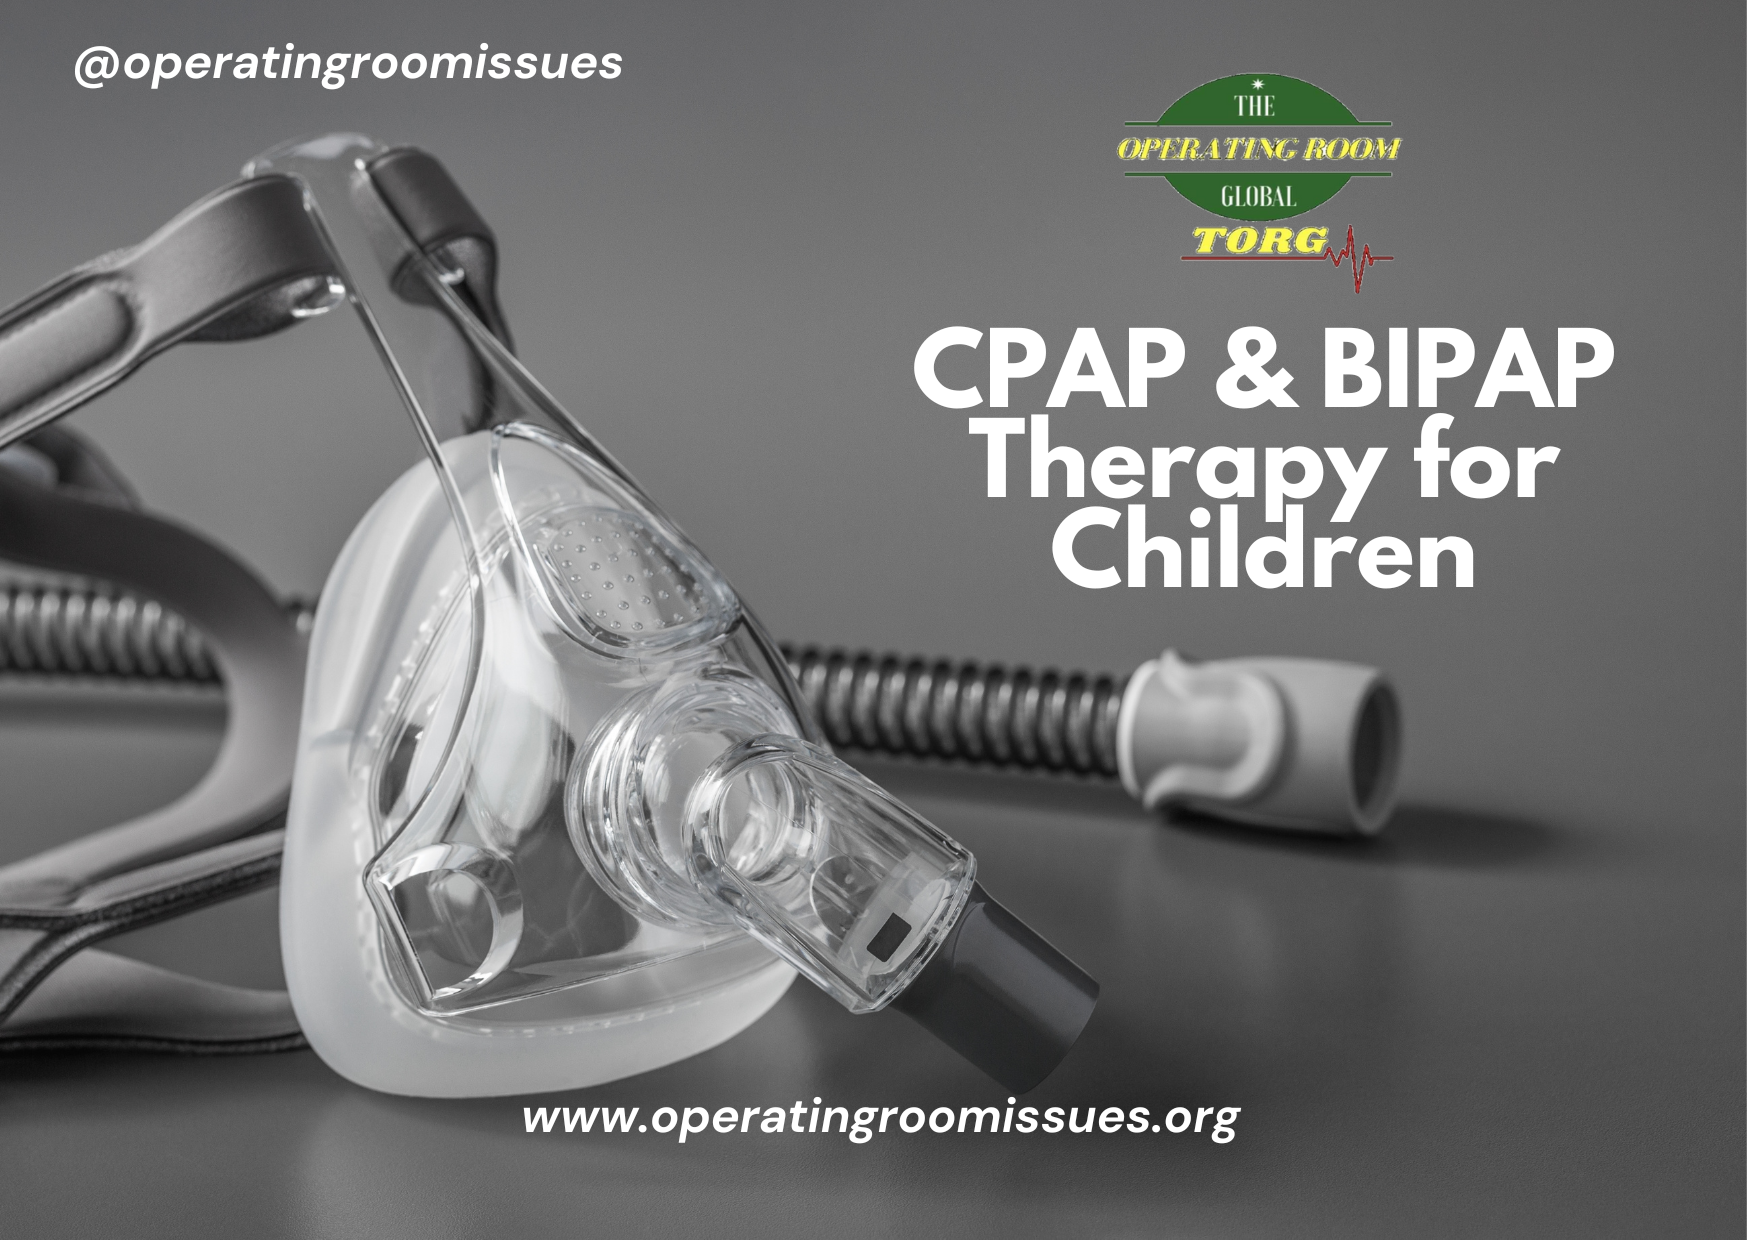 CPAP & BIPAP Therapy for Children – What you need to know!